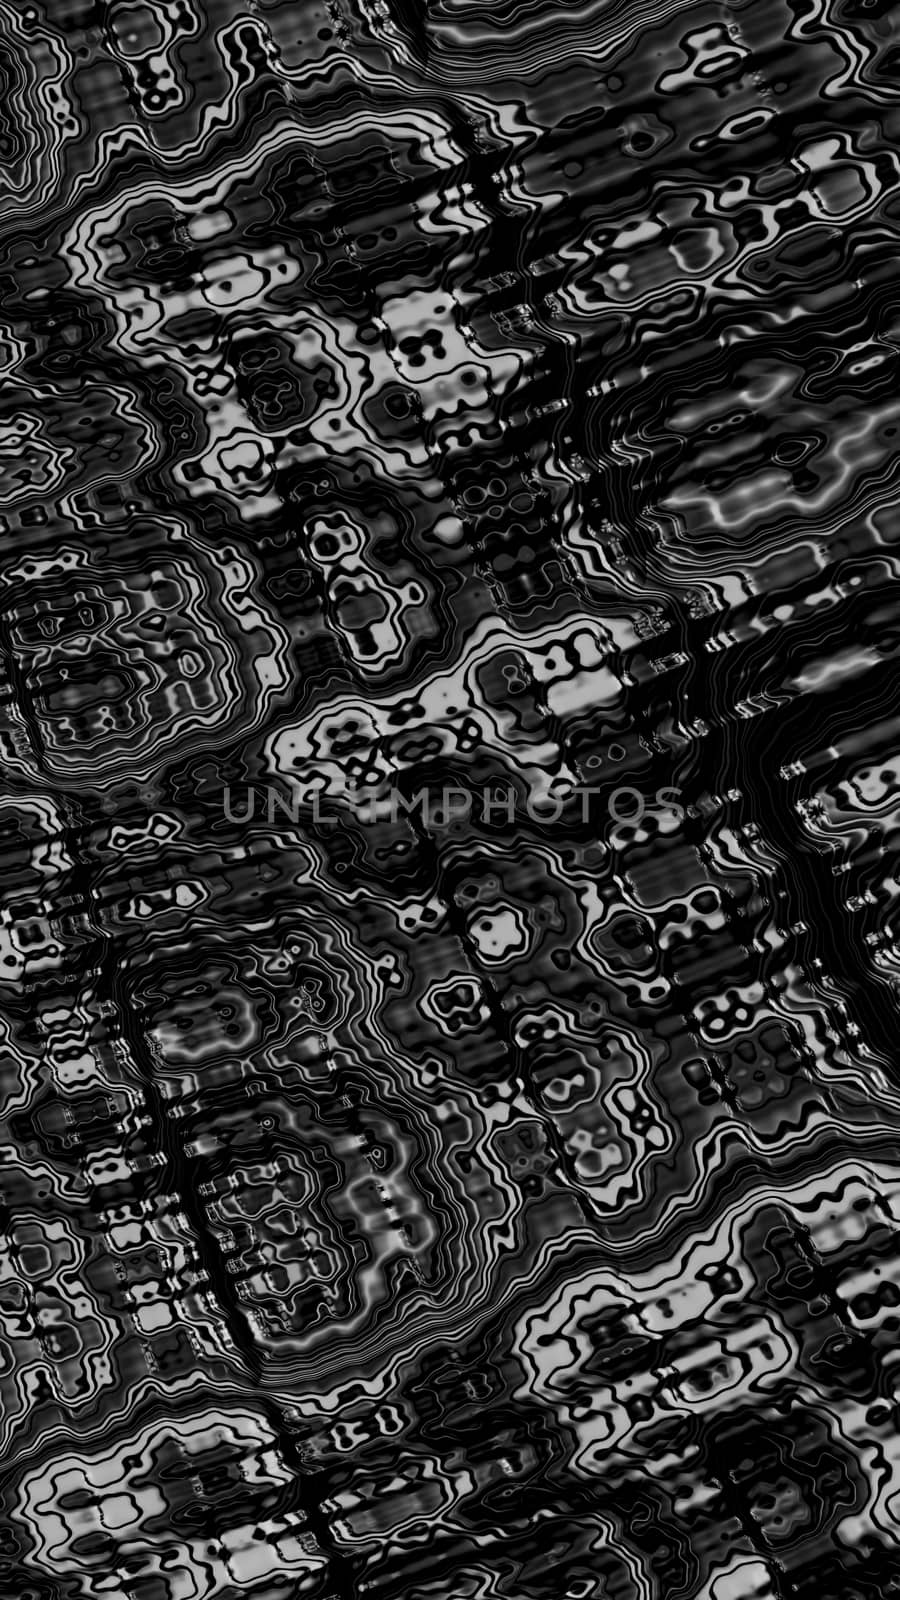 Monochrome geometric background - computer-generated image. Fractal art: randomly placed spots, stains, lines and curls. For desktop wallpaper, web design, covers. 